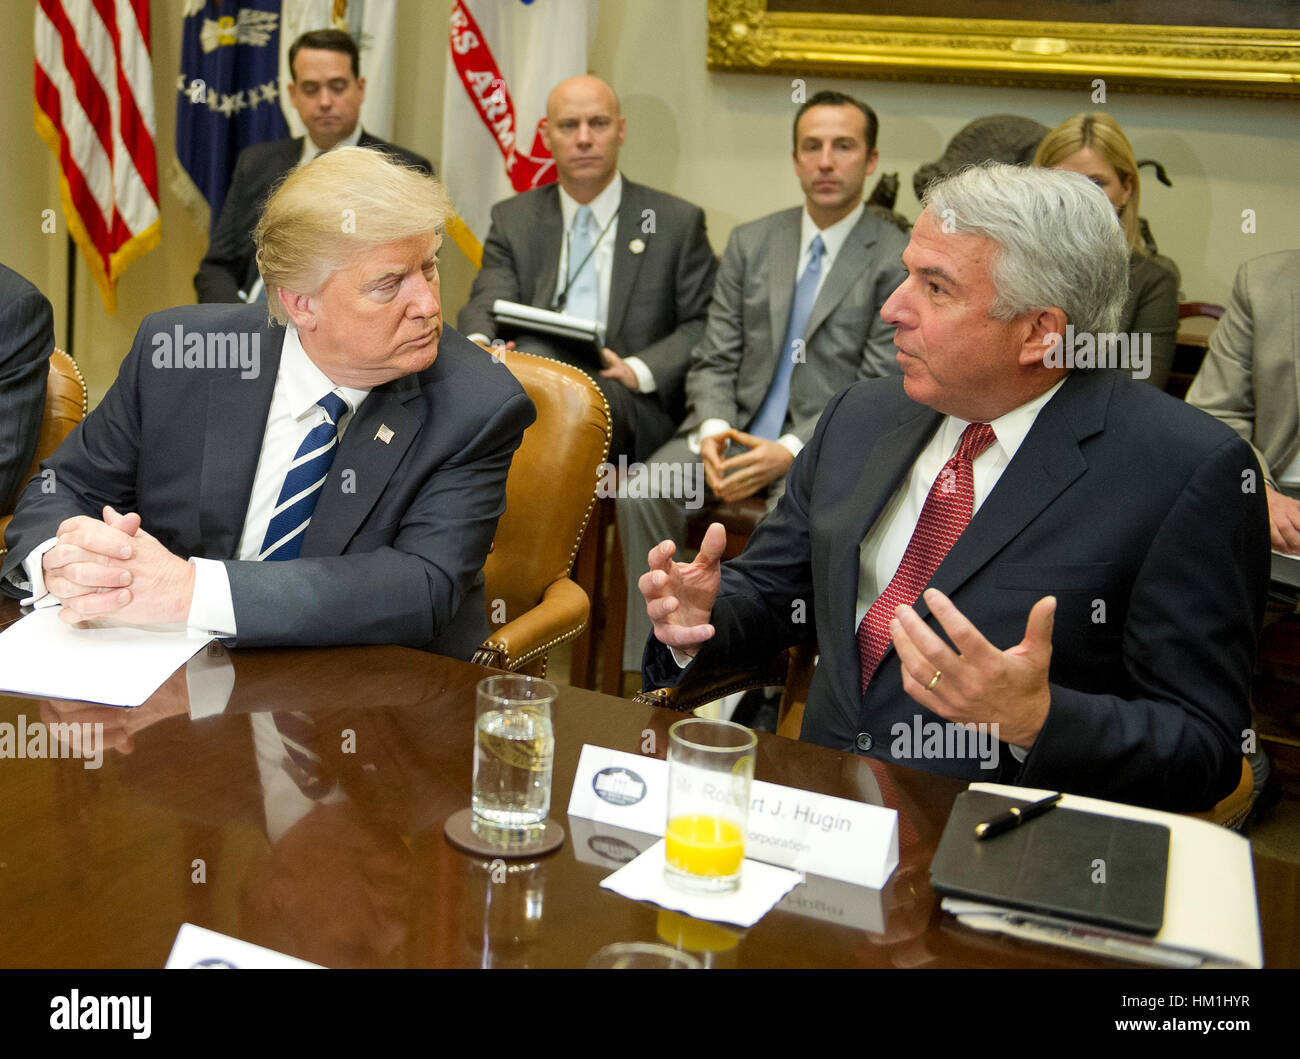 United States President Donald Trump meets with representatives from PhRMA, the Pharmaceutical Research and Manufacturers of America in the in the Roosevelt Room of the White House in Washington, DC on Tuesday, January 31, 2017. According to its website PhRMA 'represents the country·s leading biopharmaceutical researchers and biotechnology companies.' At right is Robert J. Hugin, Executive Chairman, Celgene Corporation. Credit: Ron Sachs/Pool via CNP - NO WIRE SERVICE - Photo: Ron Sachs/Consolidated/dpa Stock Photo